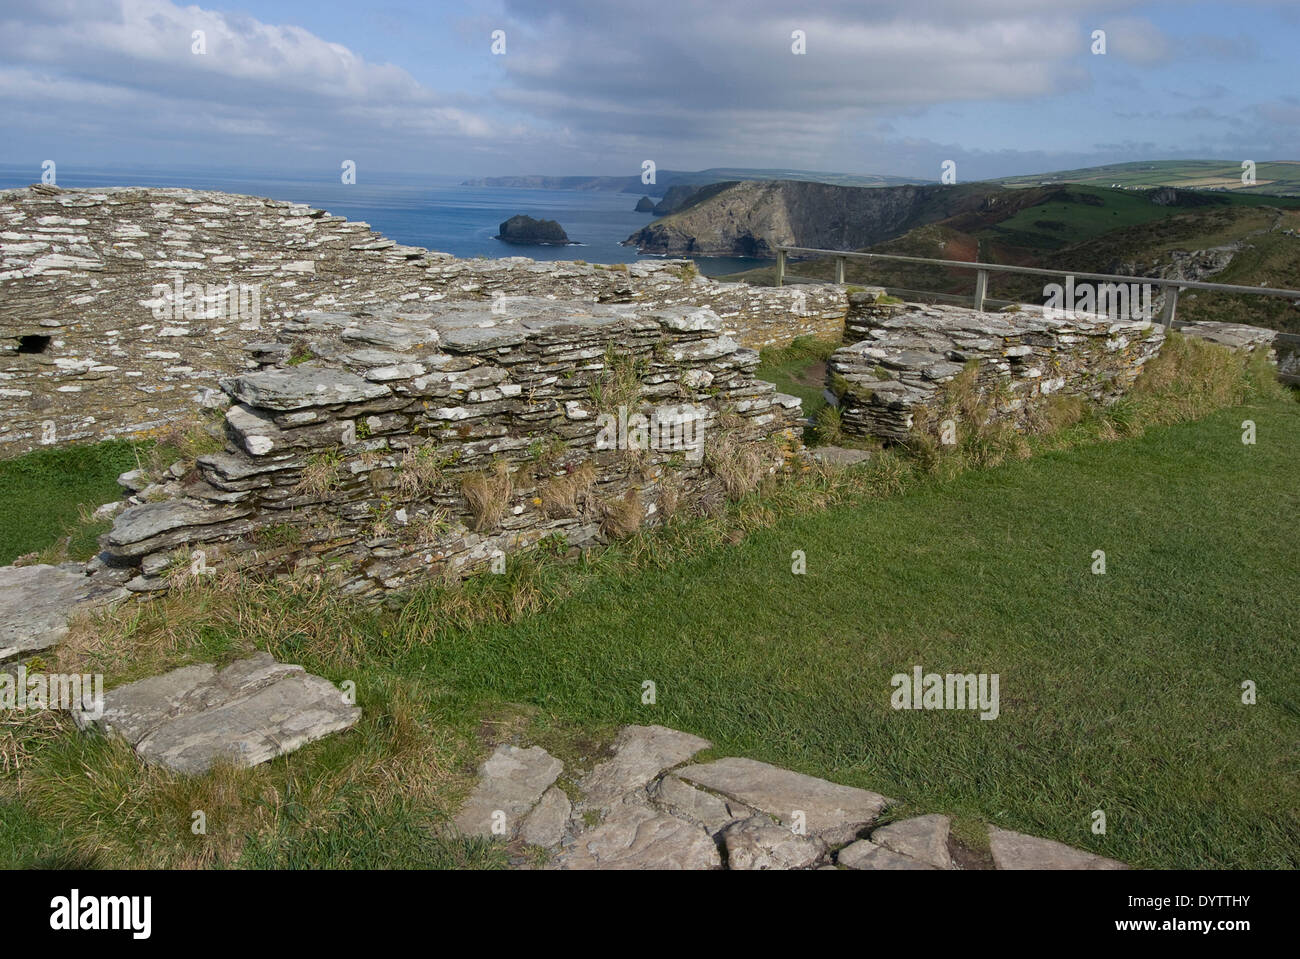 Remains of a medieval coastal cliff top castle, the legendary site of King Arthur's Camelot, Tintagel, Cornwall, UK Stock Photo